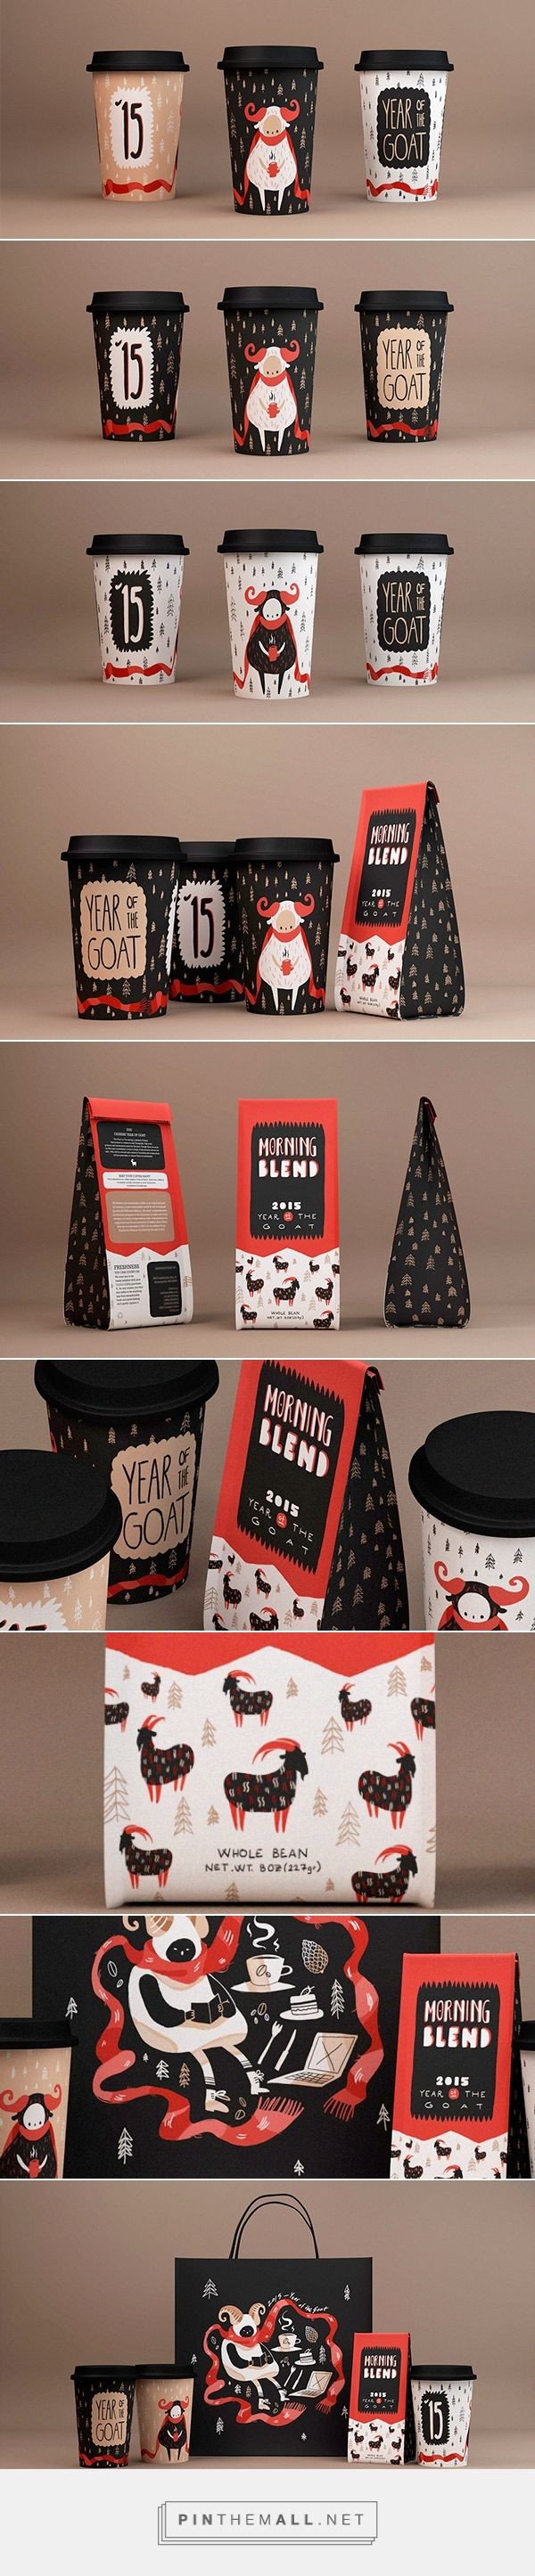 Chinese Year of the Goat / Coffee packaging PD